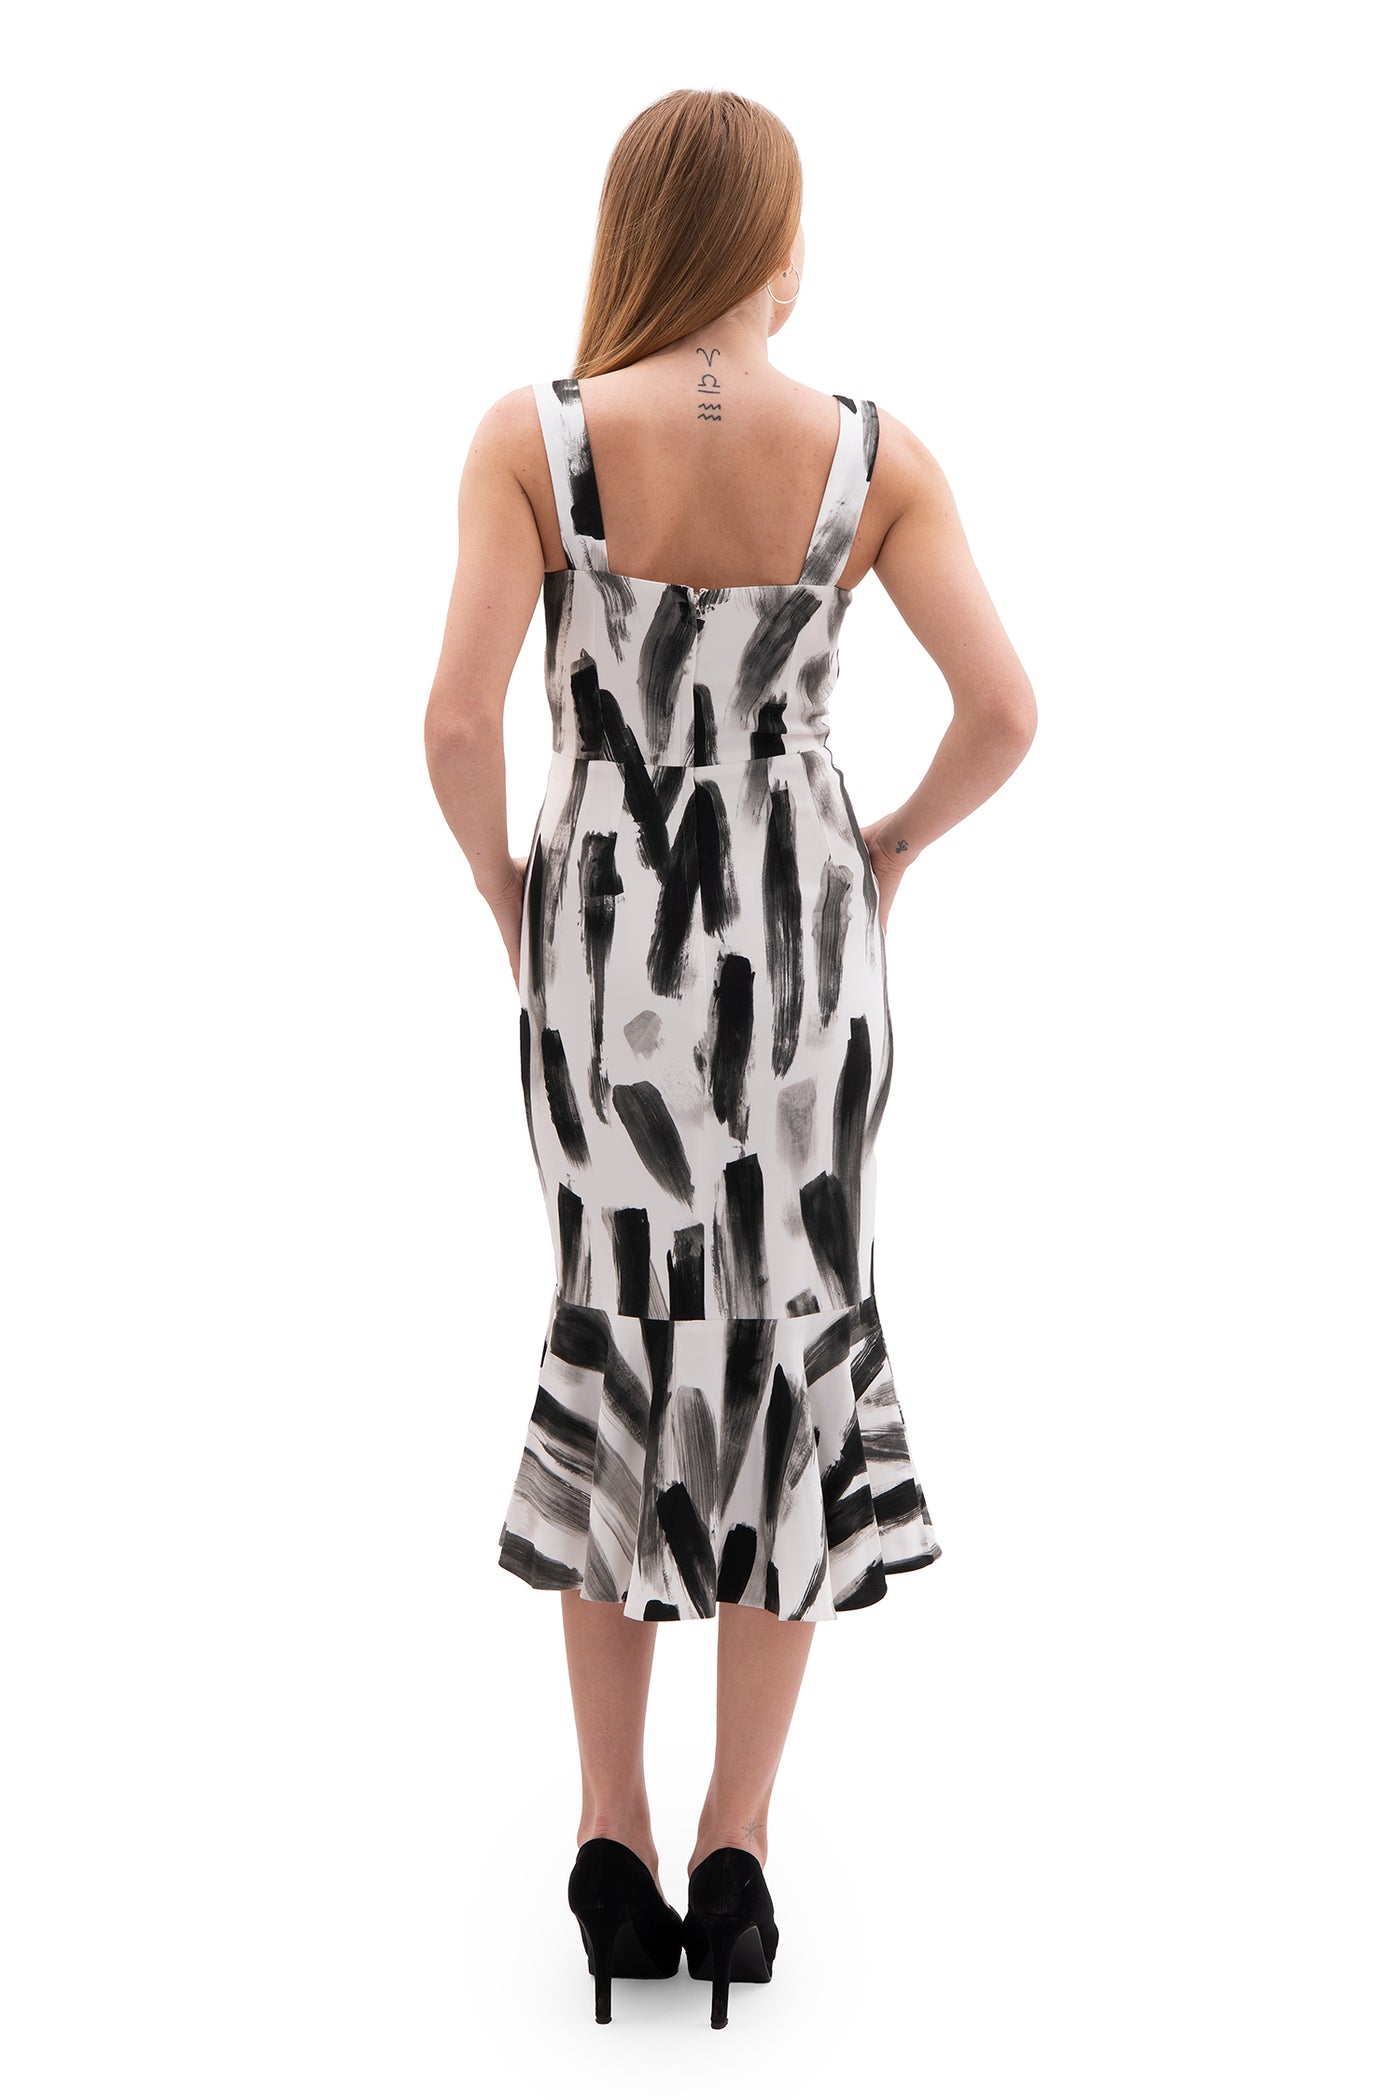 Dolce and Gabbana black and white trumpet dress